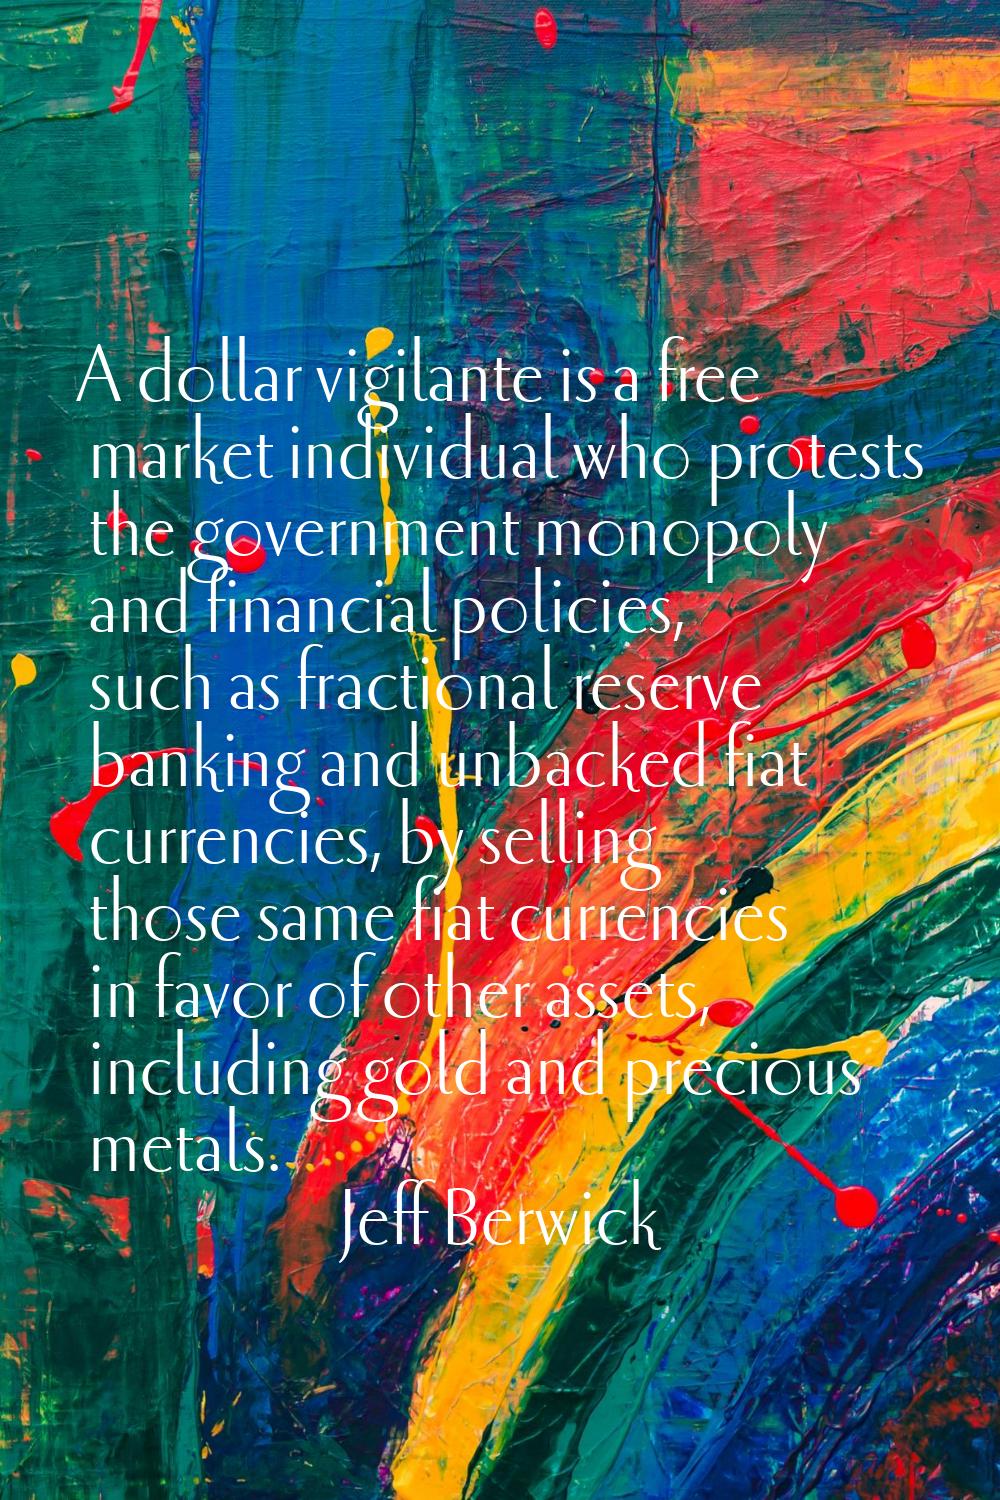 A dollar vigilante is a free market individual who protests the government monopoly and financial p